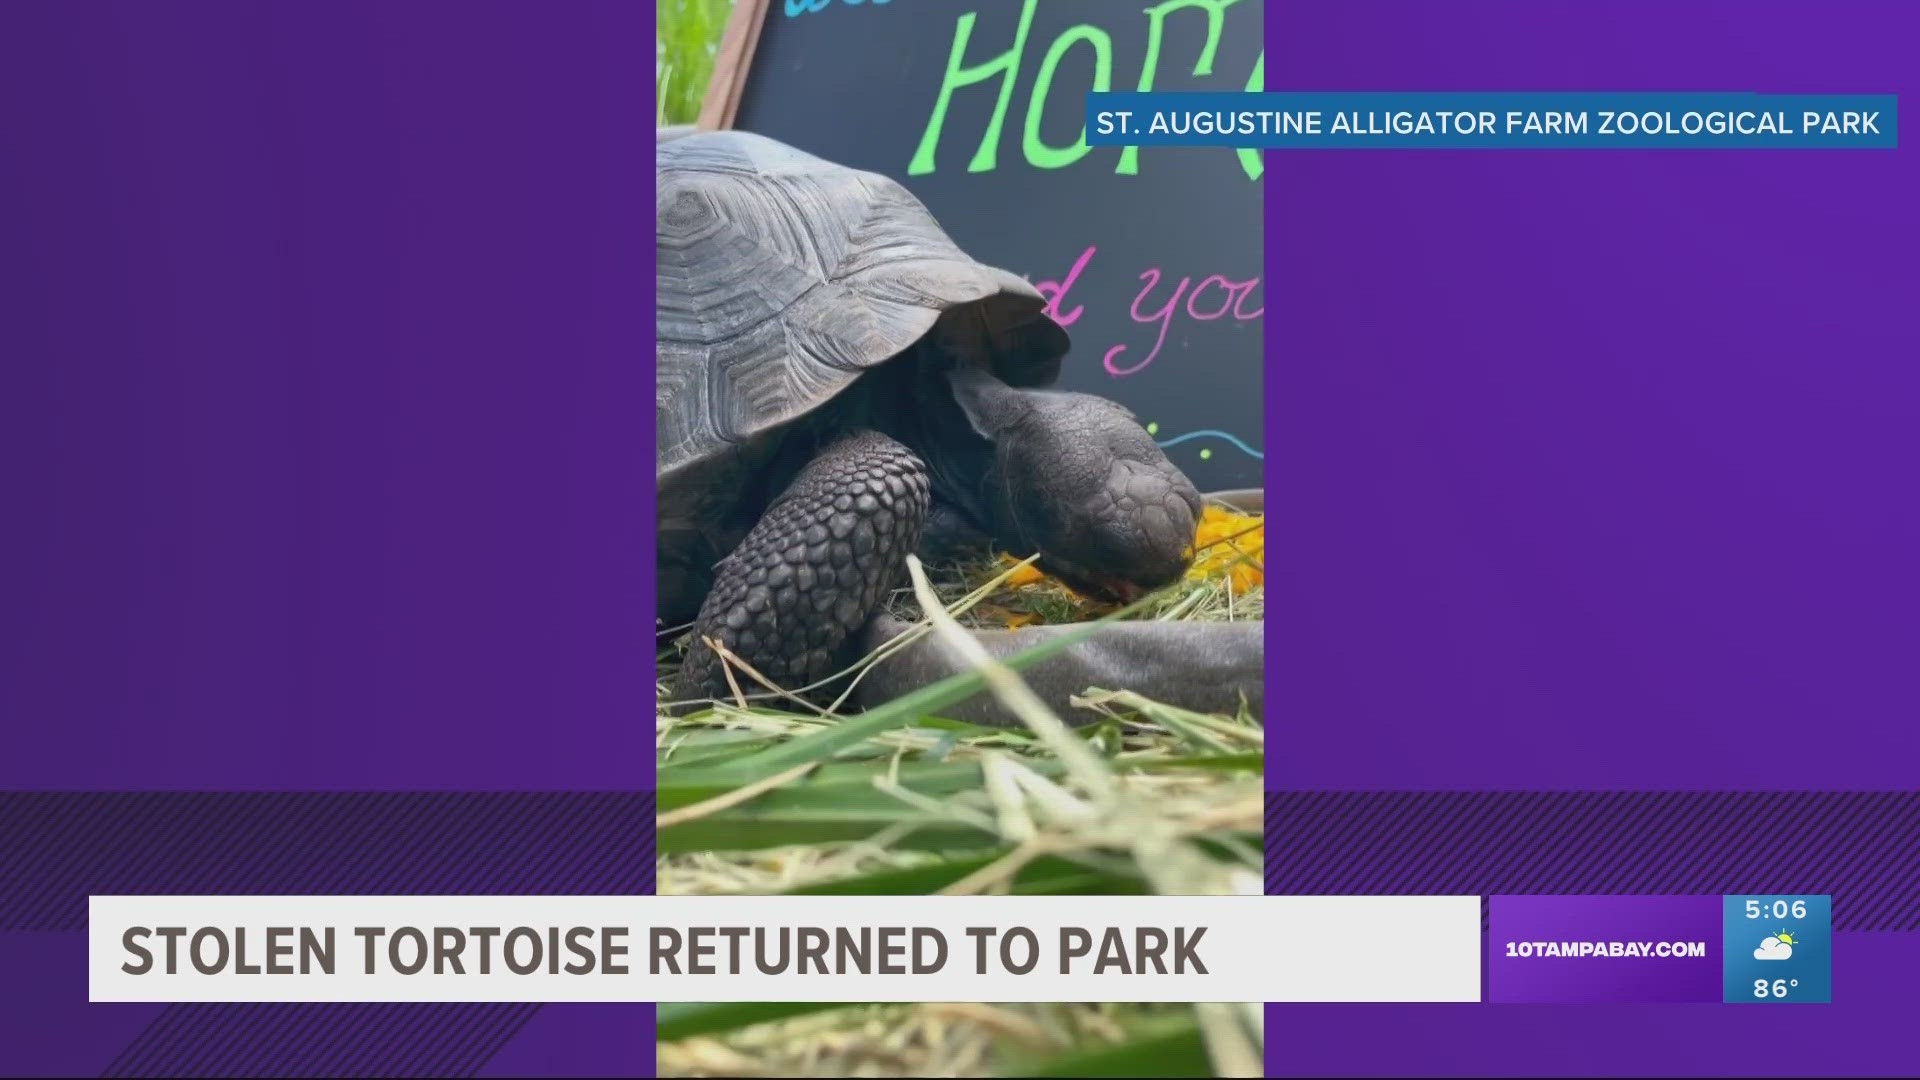 Two young Galapagos tortoises were stolen from the St. Augustine Alligator Farm Zoological Park in November 2022. One did not survive.